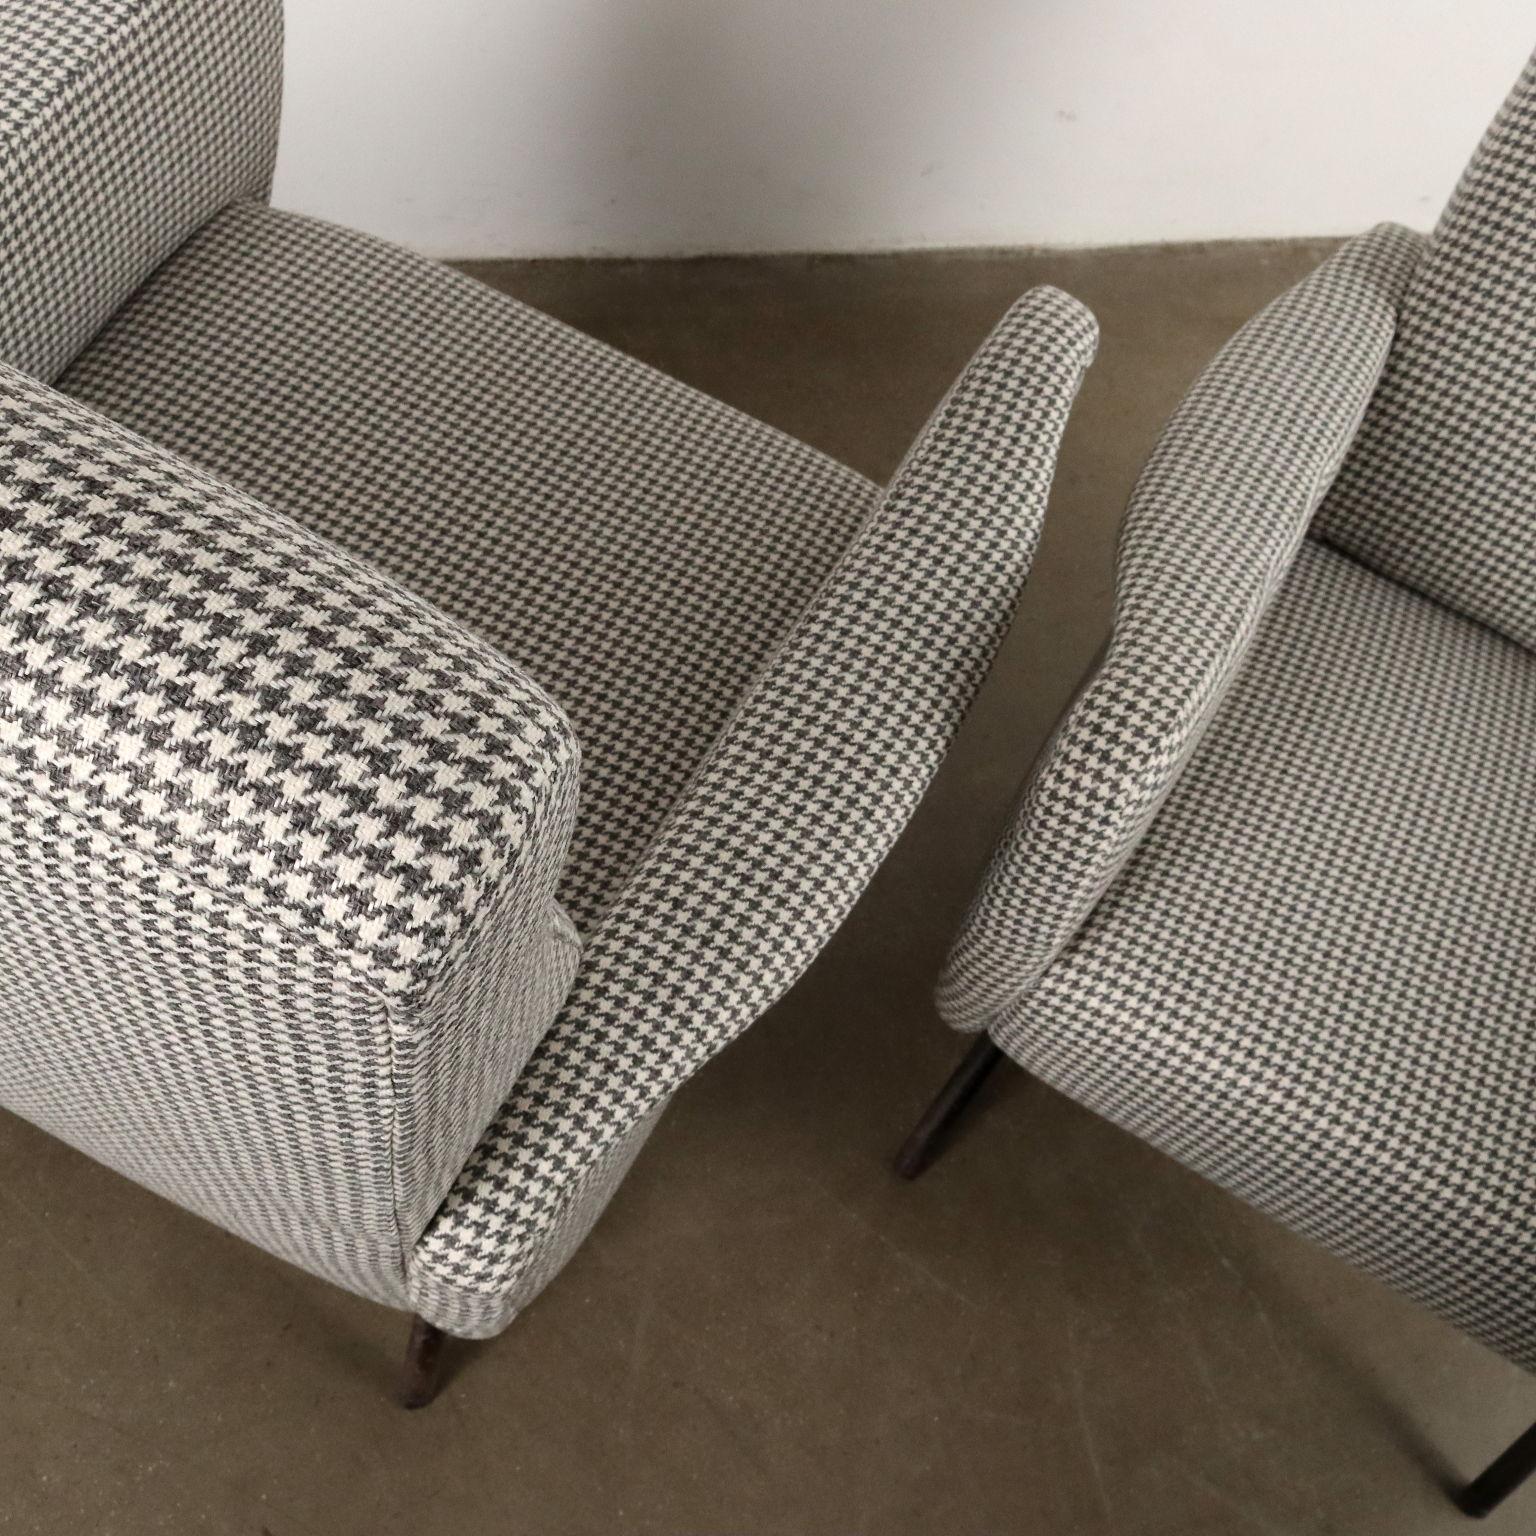 Mid-Century Modern Pair of Houndstooth Armchairs 1950s-1960s For Sale